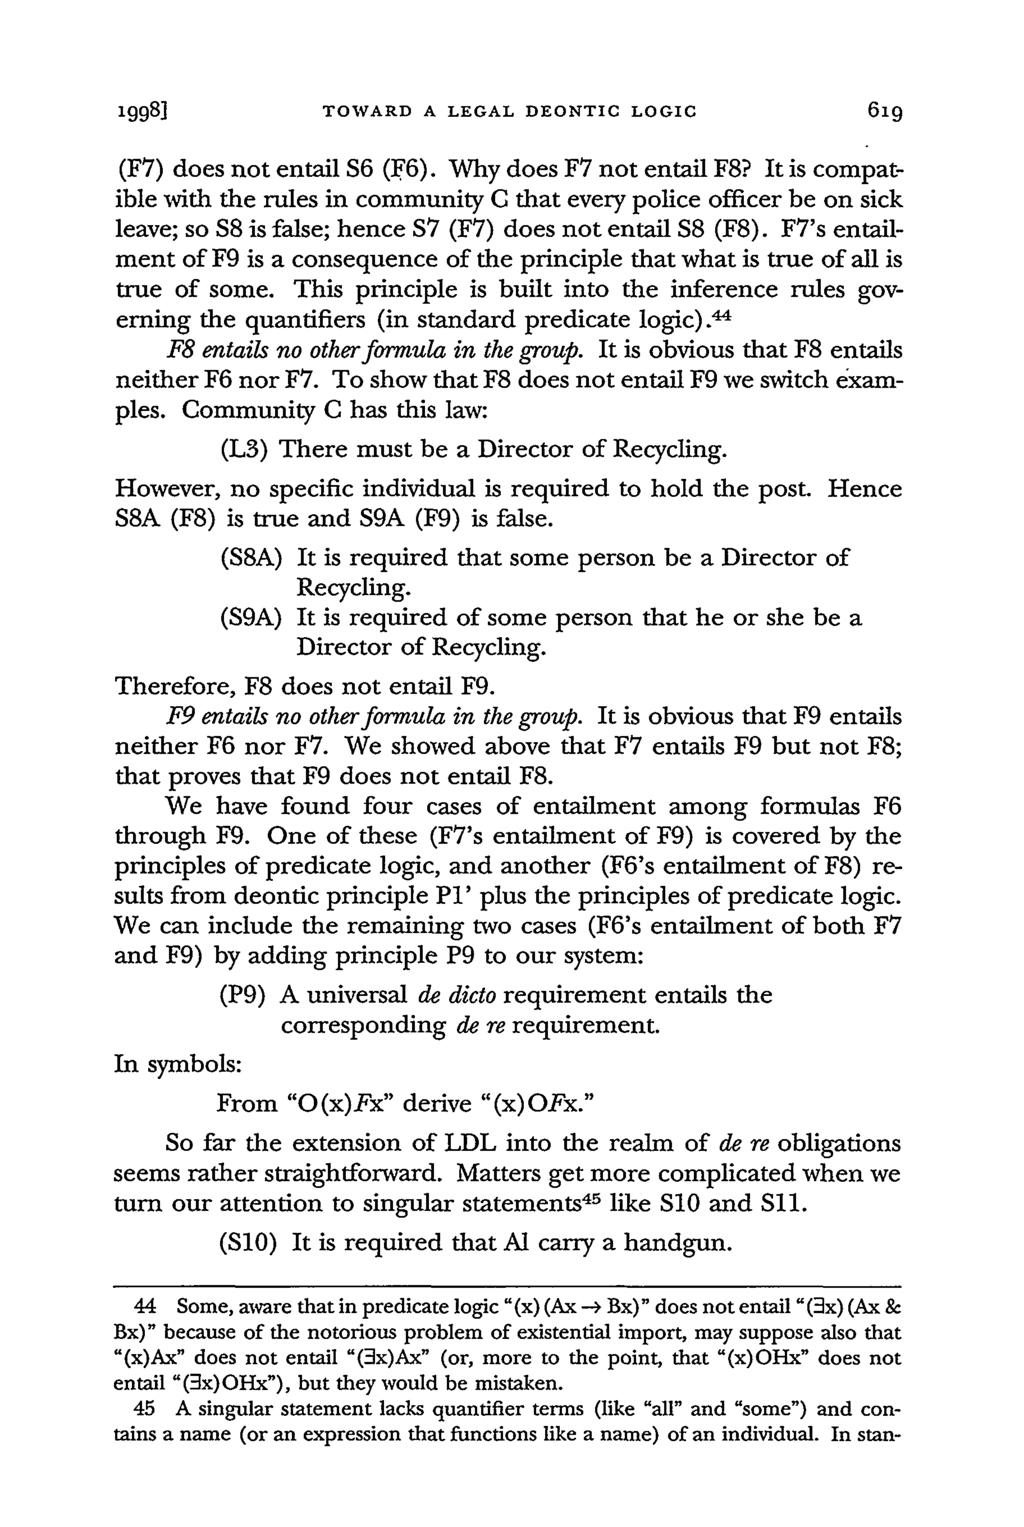 1998] TOWARD A LEGAL DEONTIC LOGIC (F7) does not entail S6 (F6). Why does F7 not entail F8?